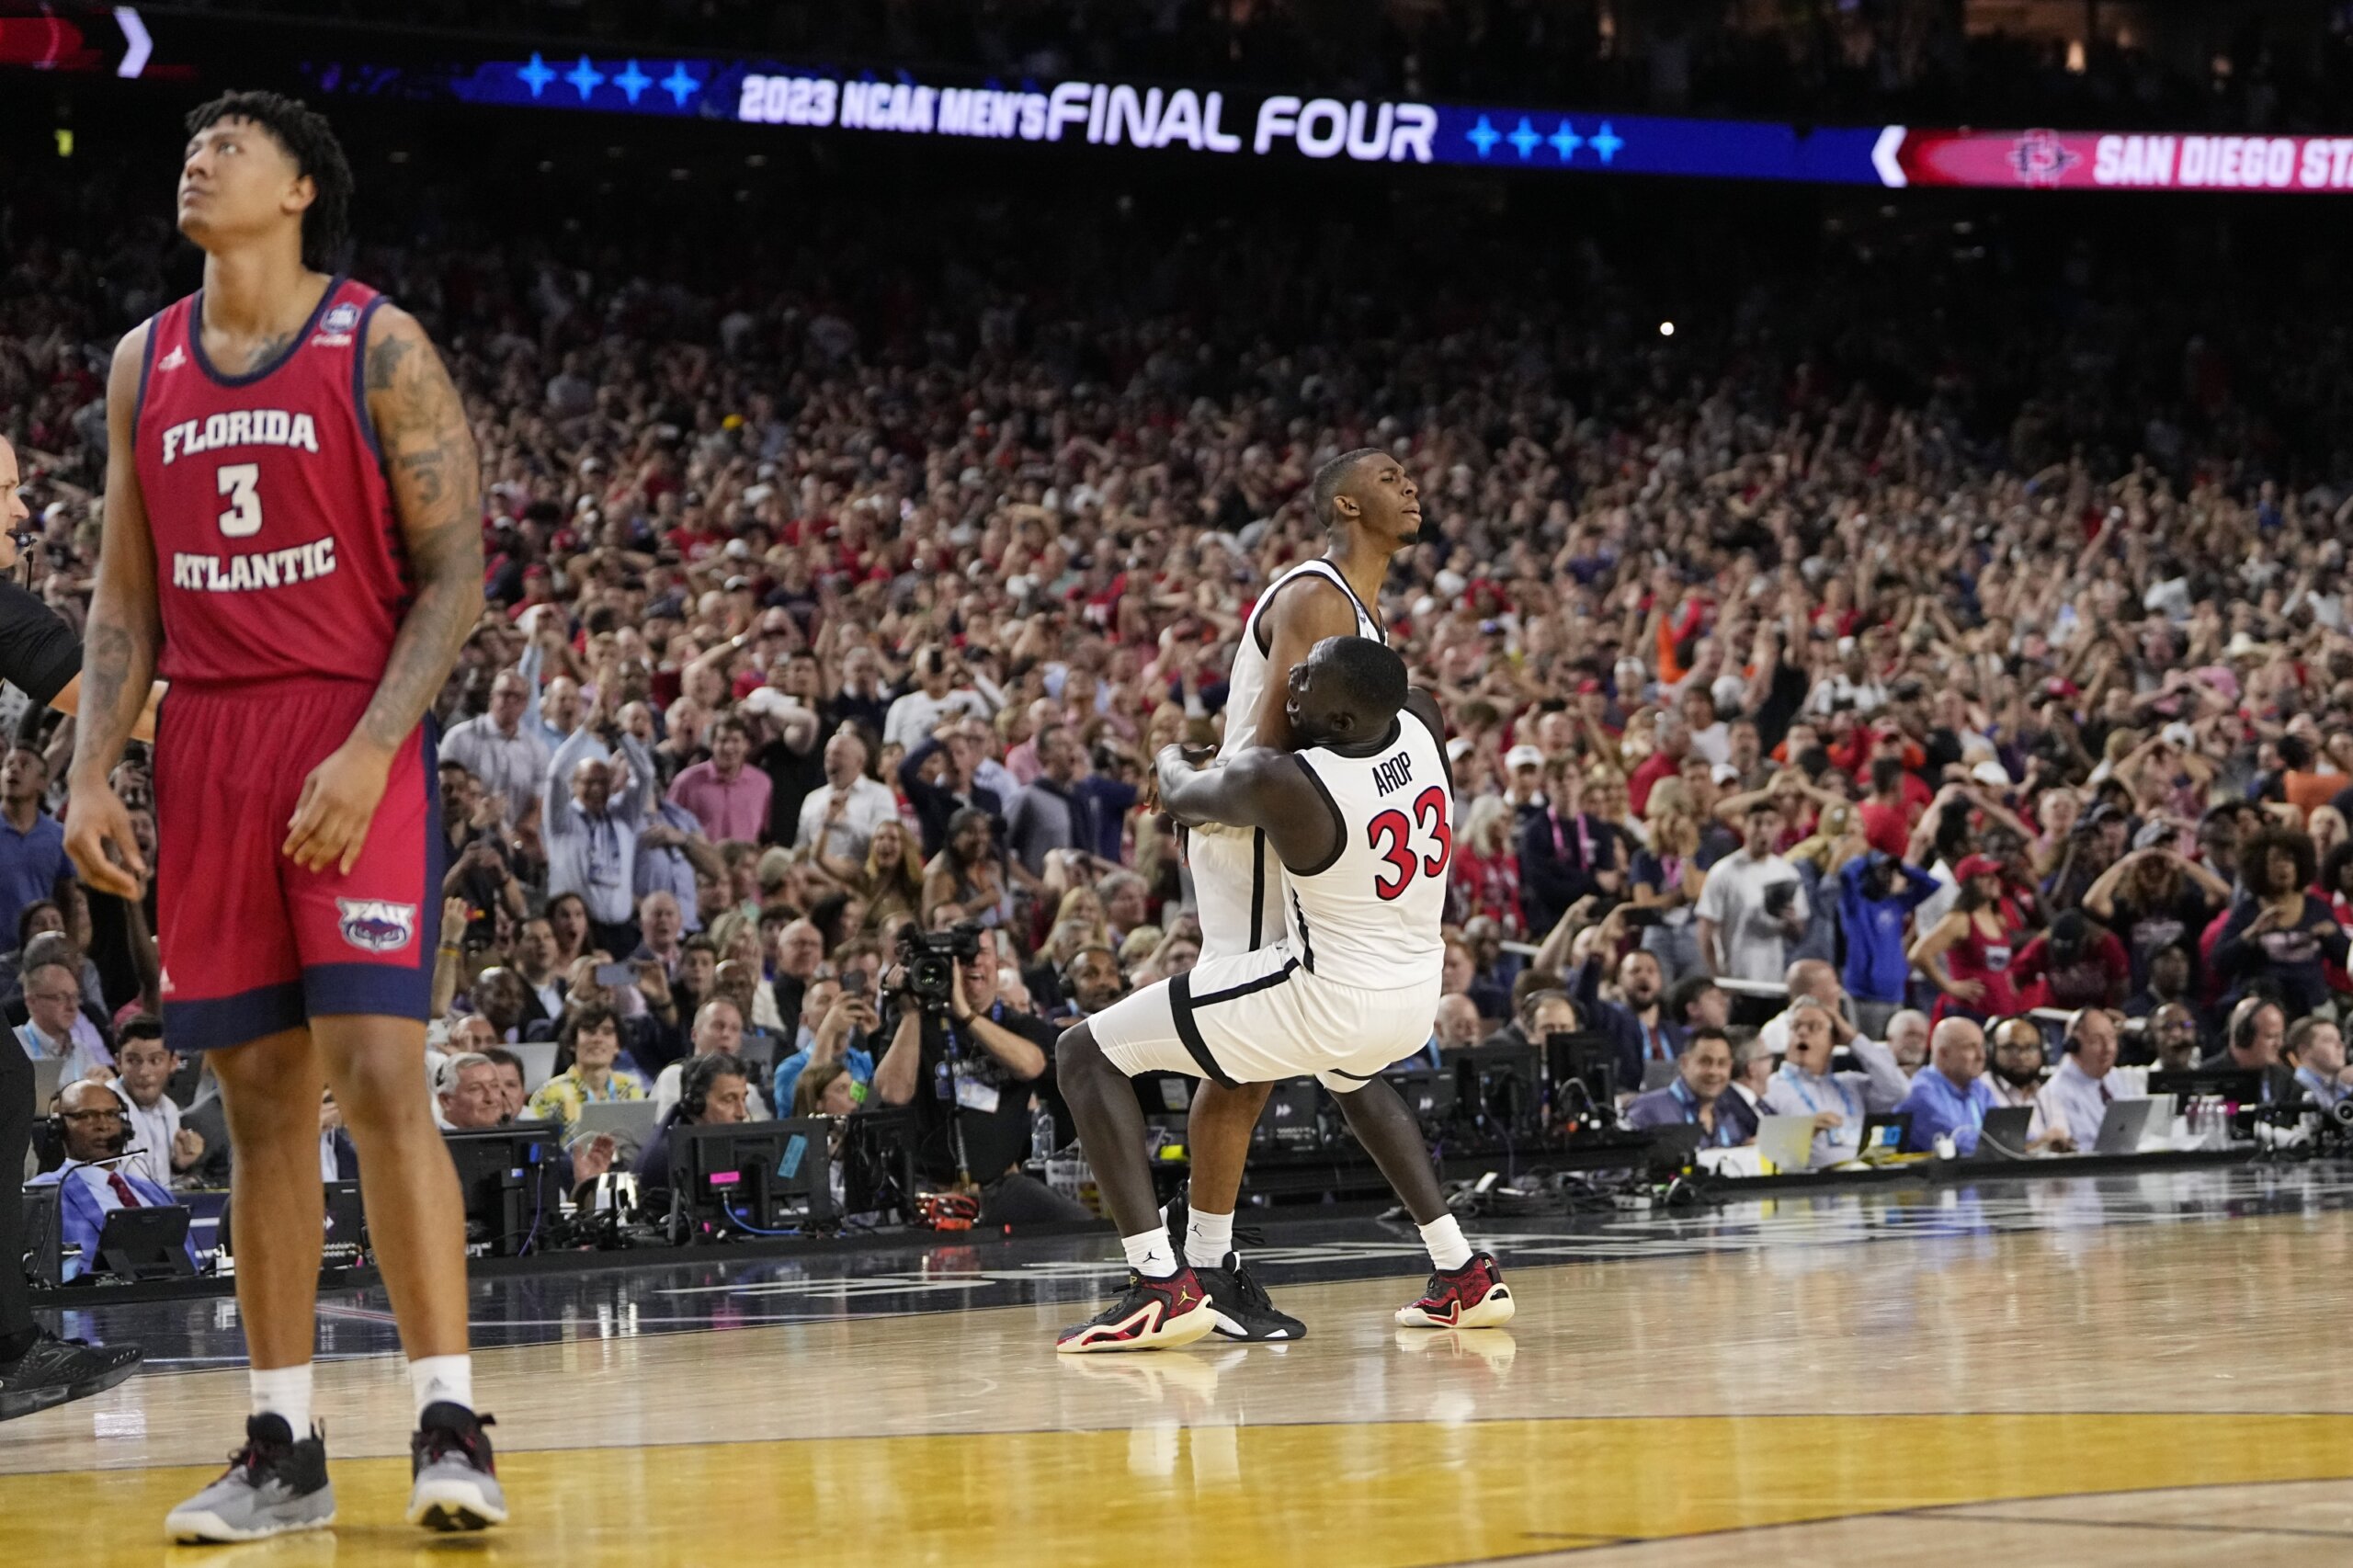 Top 10 Players With The Most Game-Winning Buzzer-Beaters In NBA History -  Fadeaway World